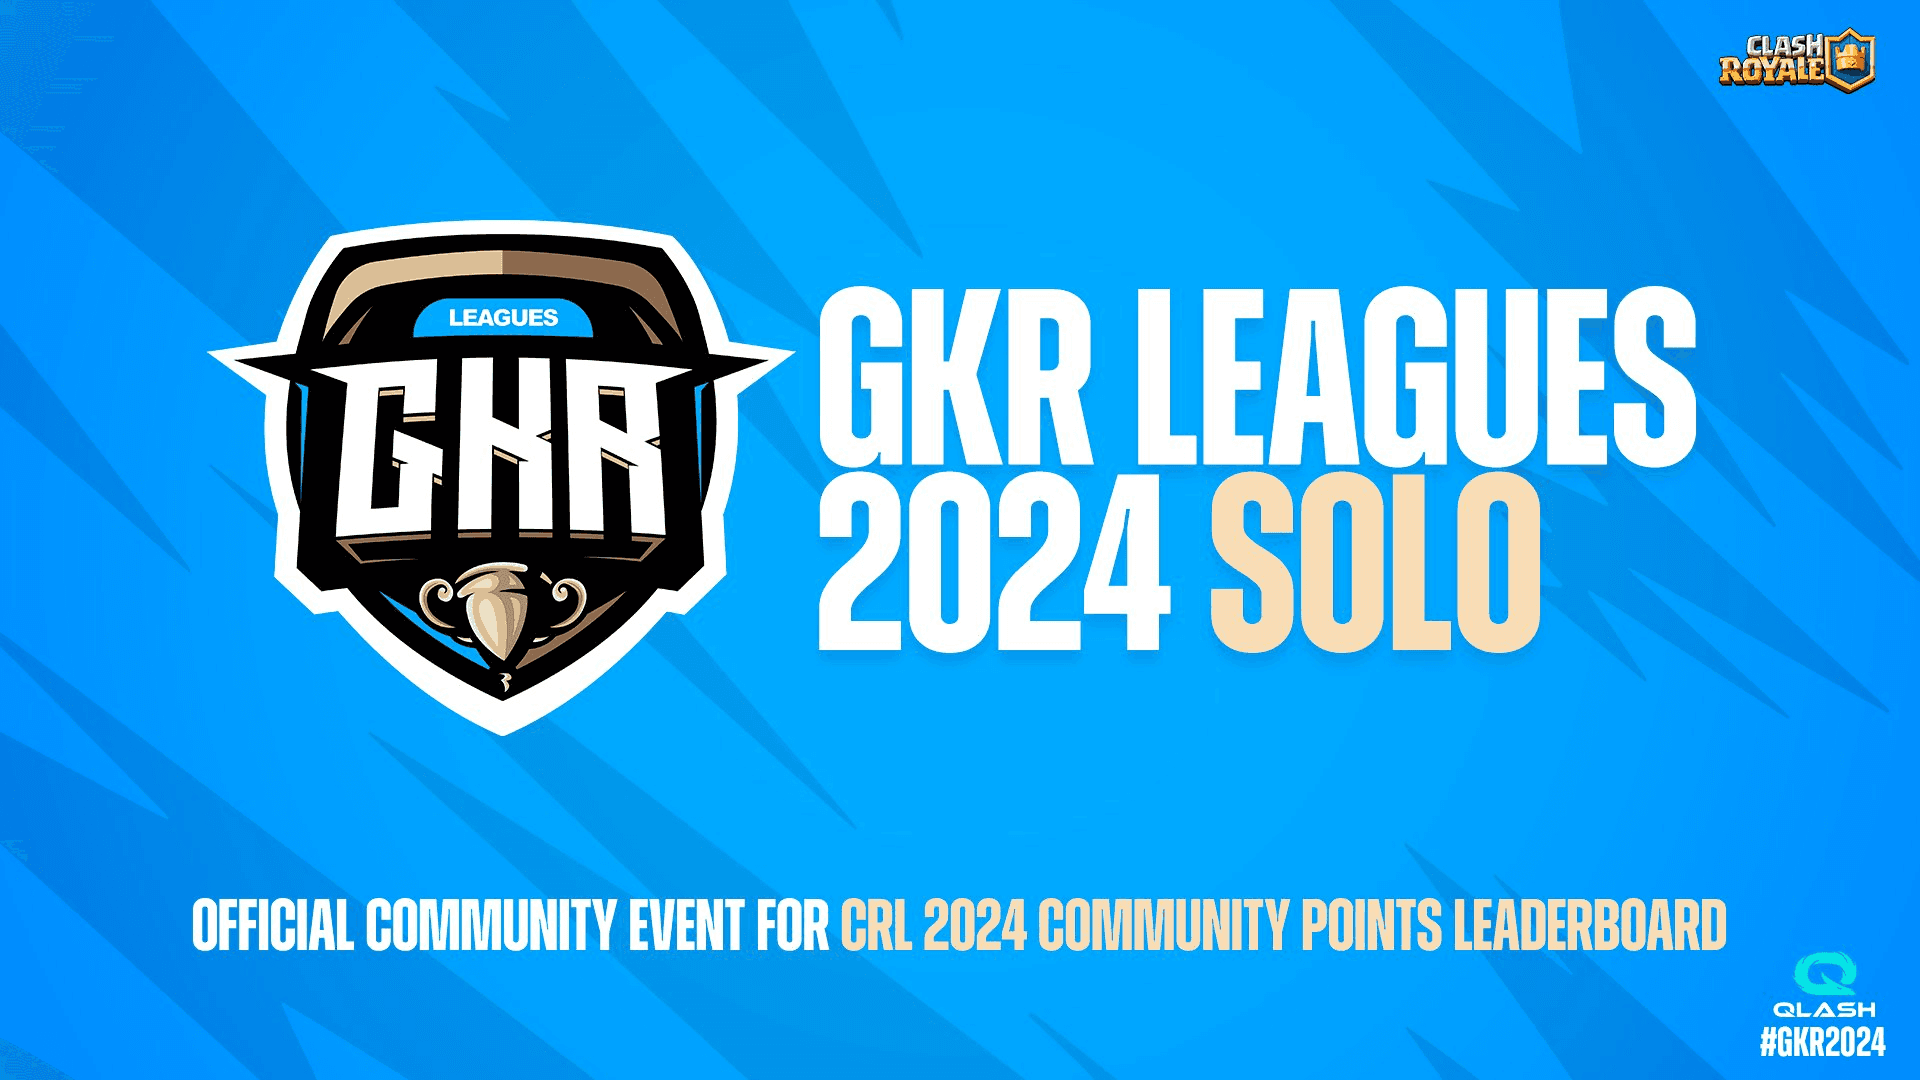 GKR 2024 Solo feature image